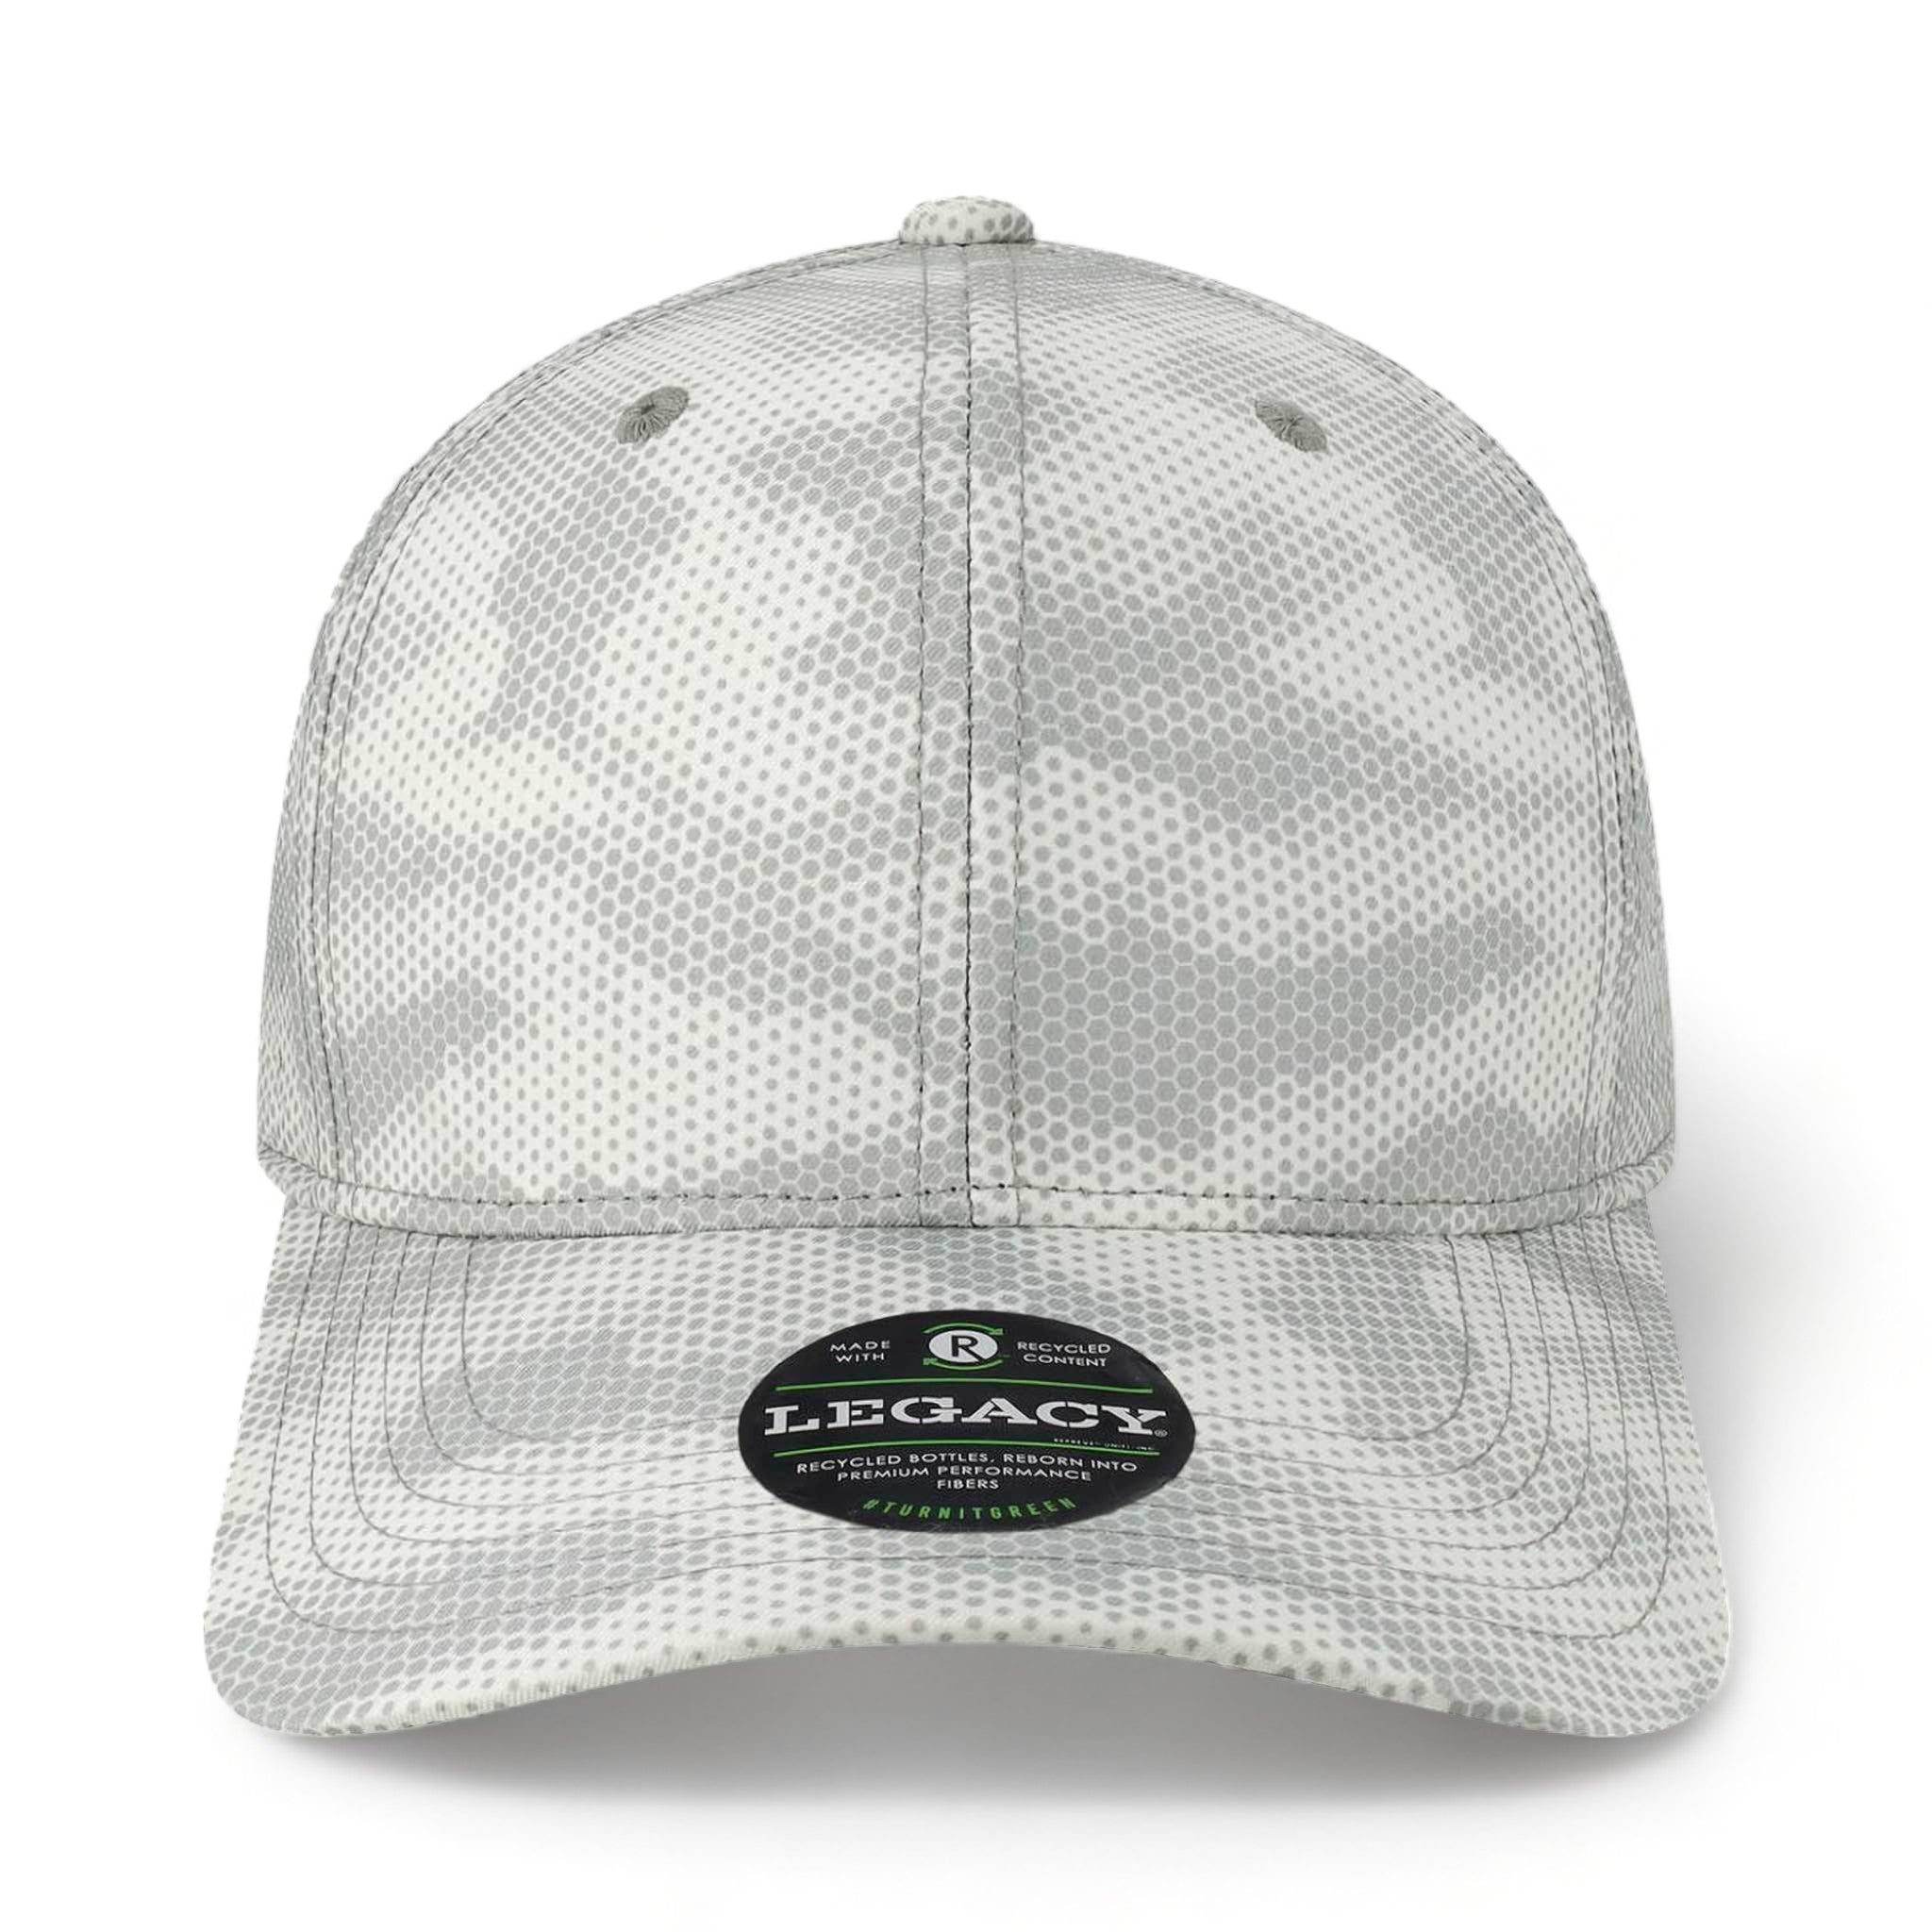 Front view of LEGACY REMPA custom hat in grey camo dots